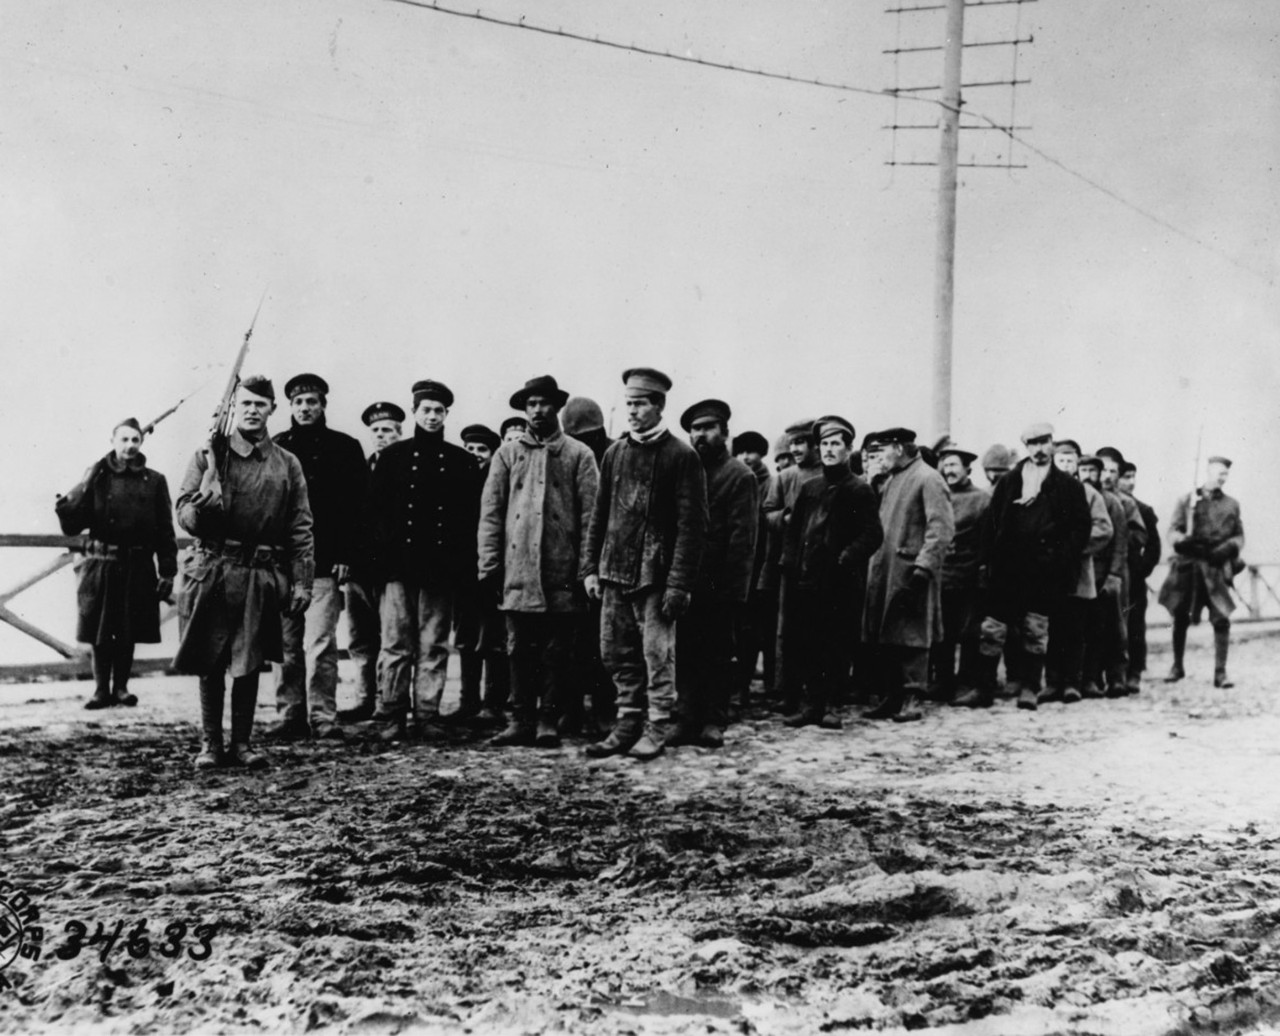 <p>U.S. Army troops guard Bolshevik prisoners of war, Archangel, 16 October 1918. Image 111-SC-34633, courtesy of the National Archives.</p>
